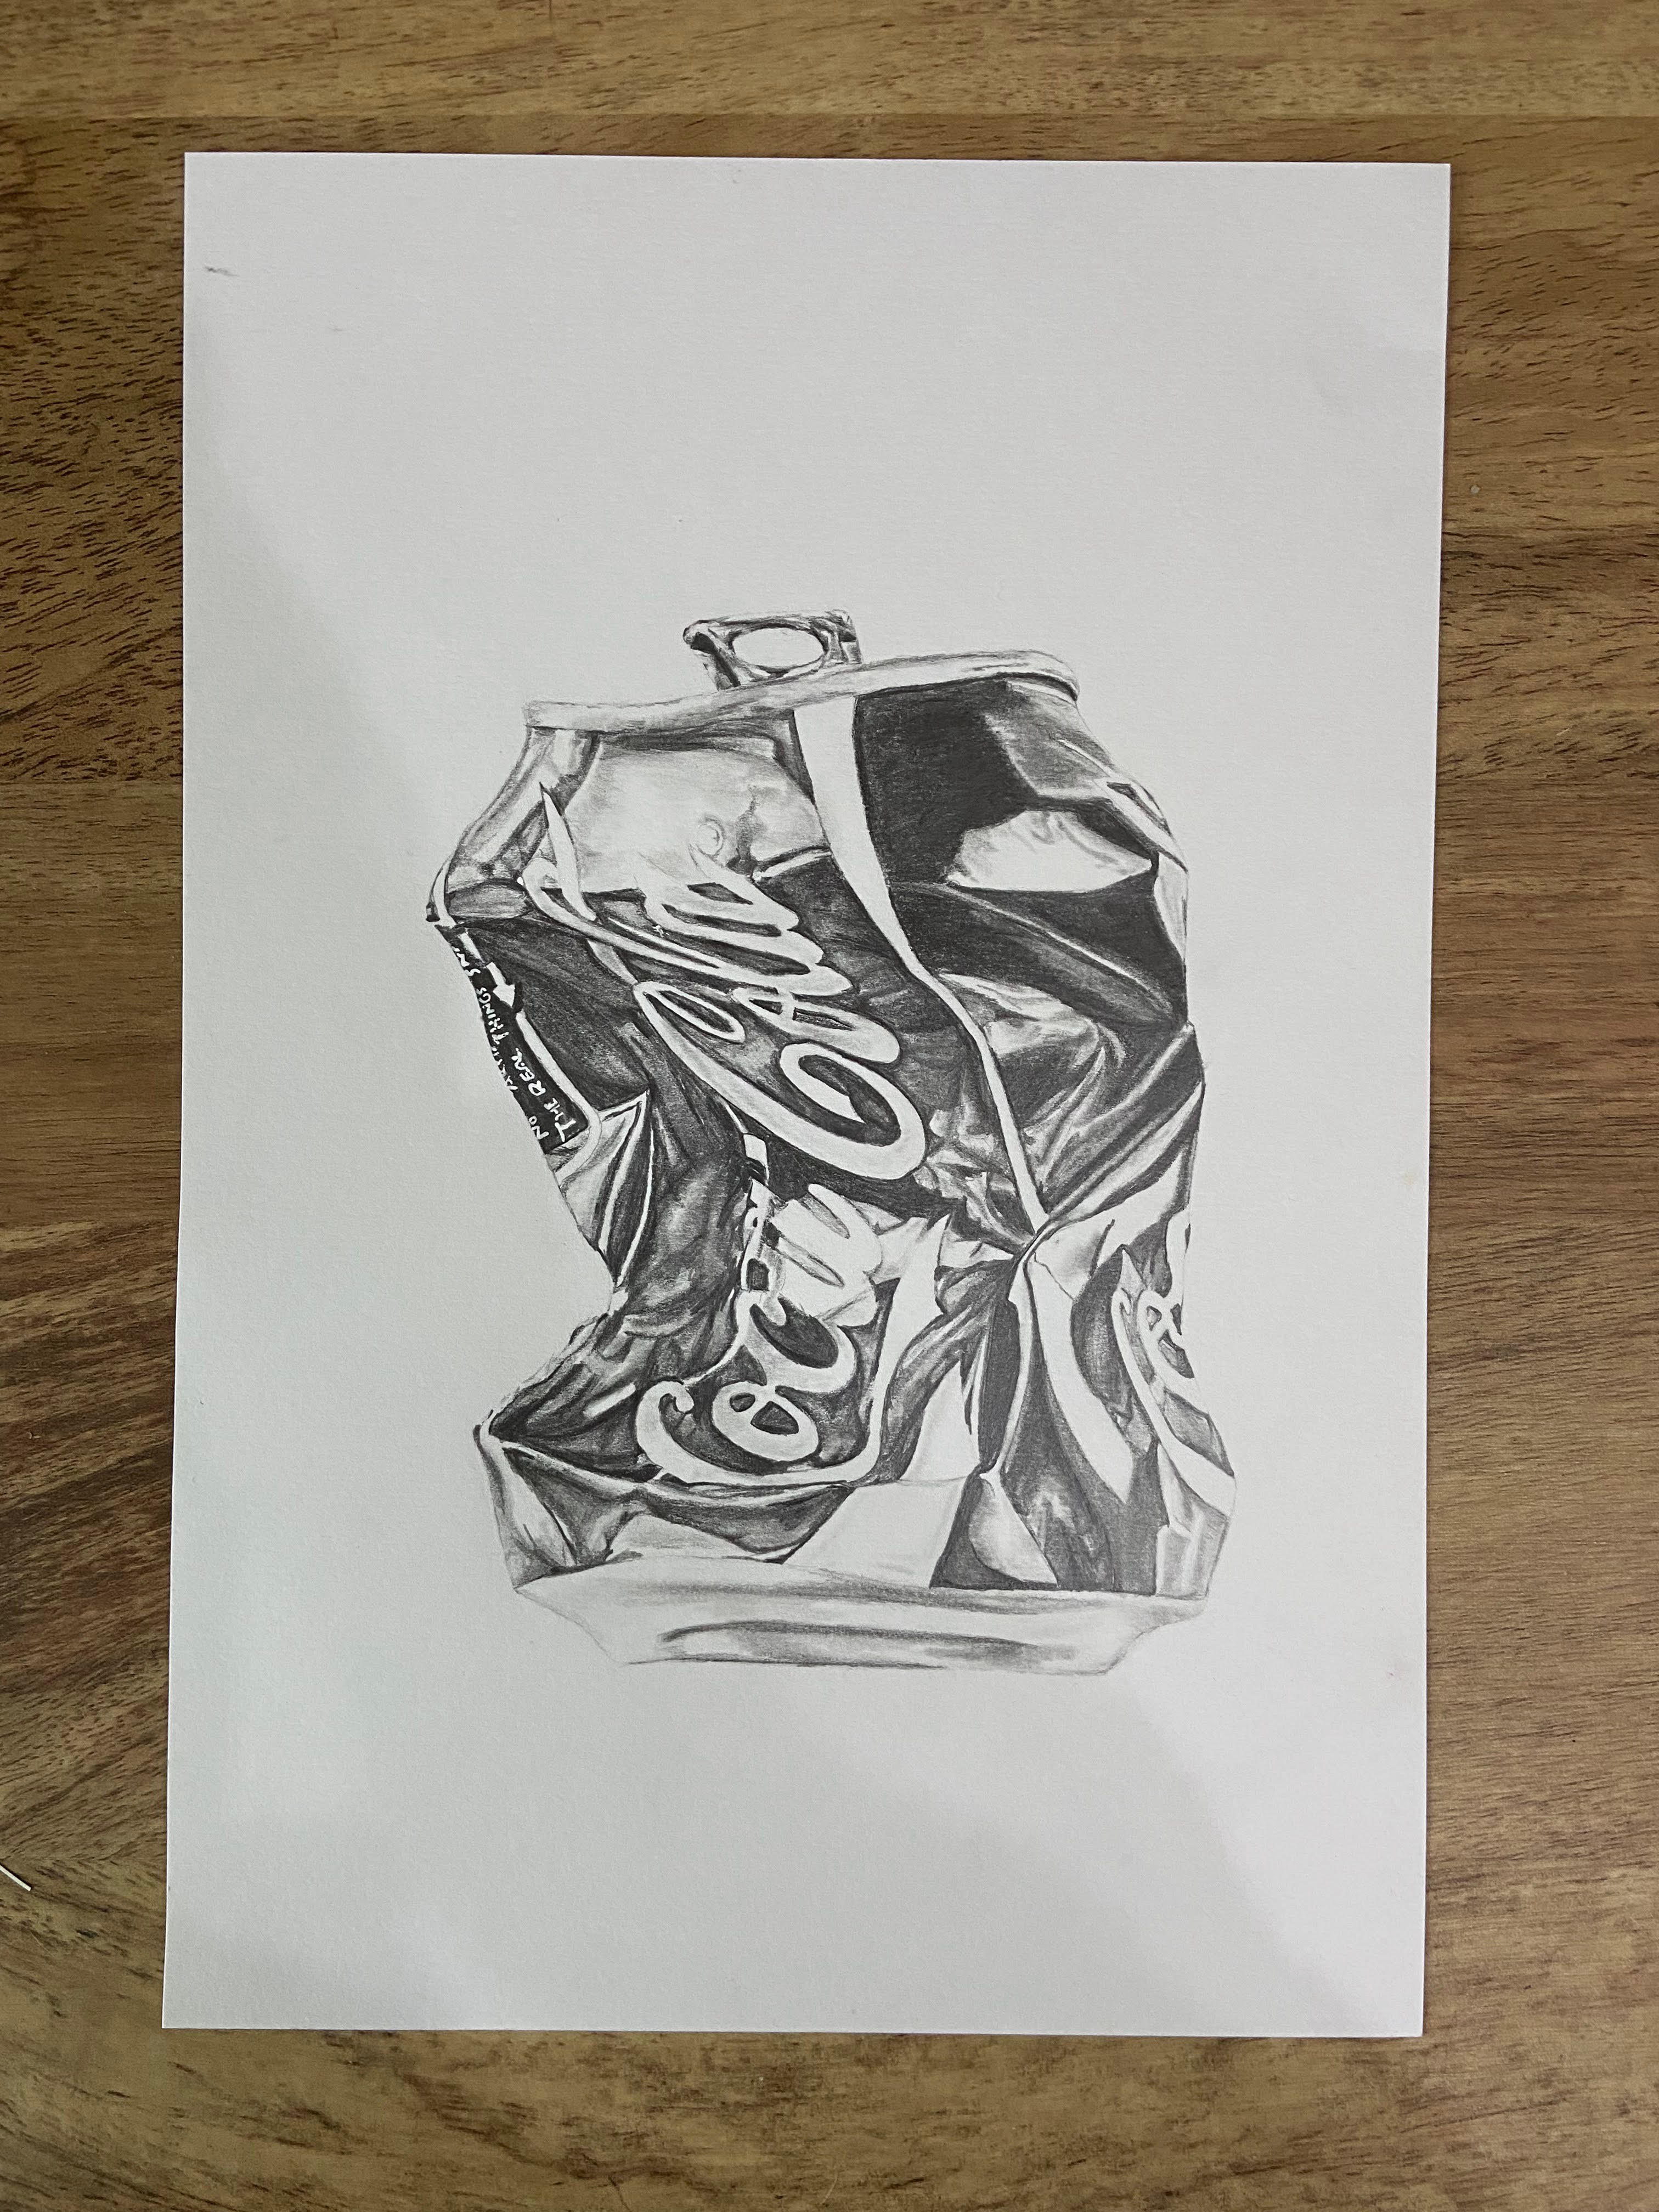 Pencil drawing of a crushed CocaCola can